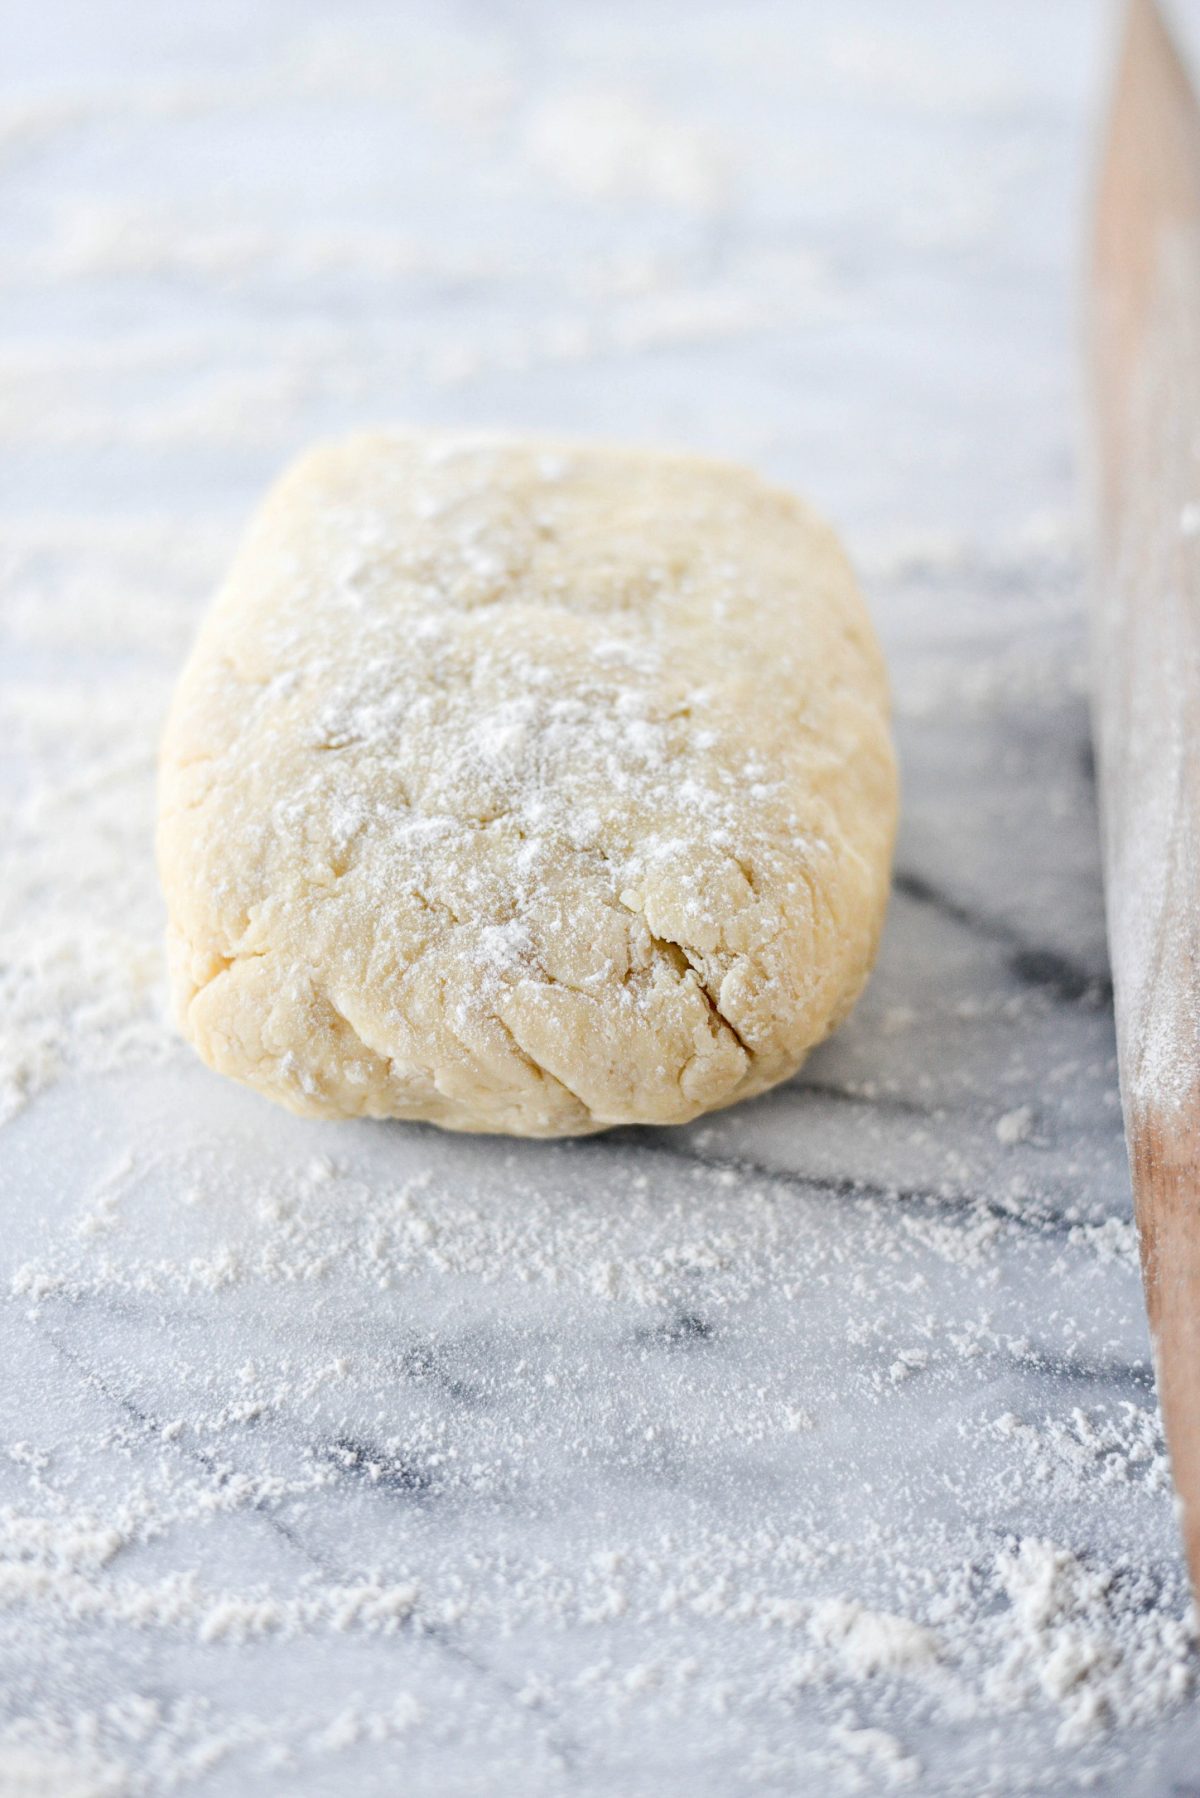 lightly flour dough and rolling pin.